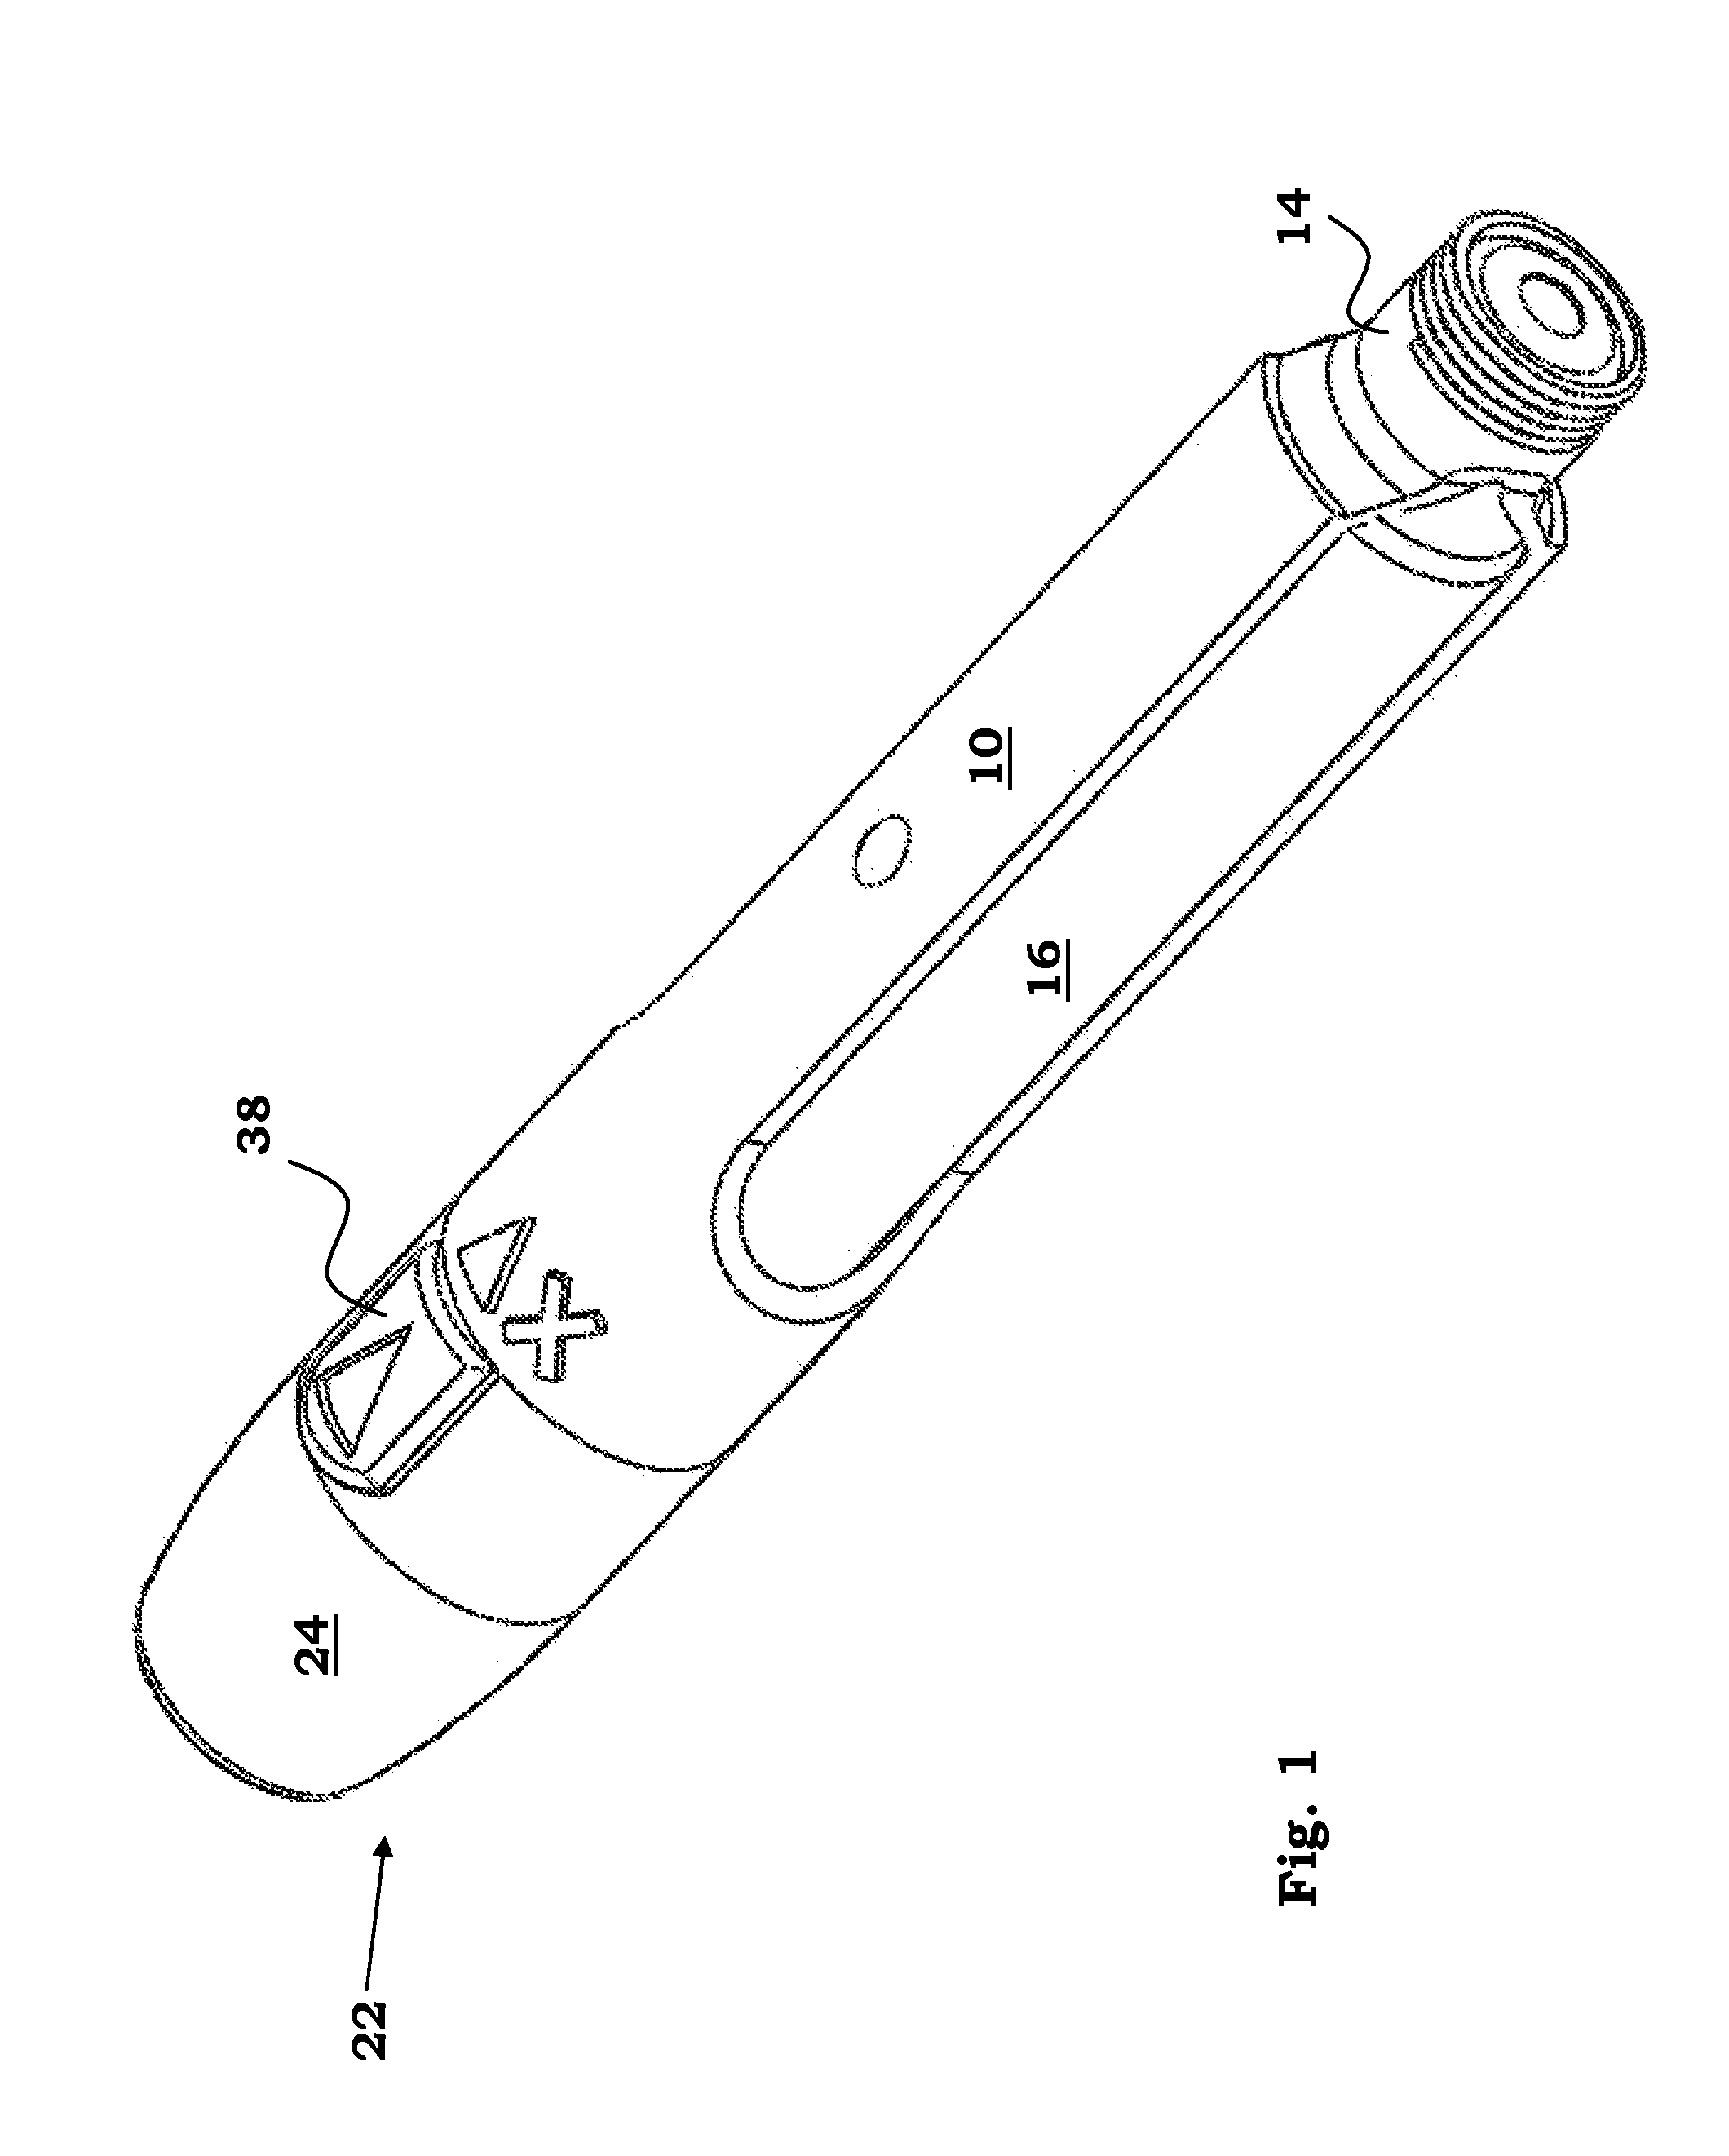 Medicament delivery device powered by volute spring